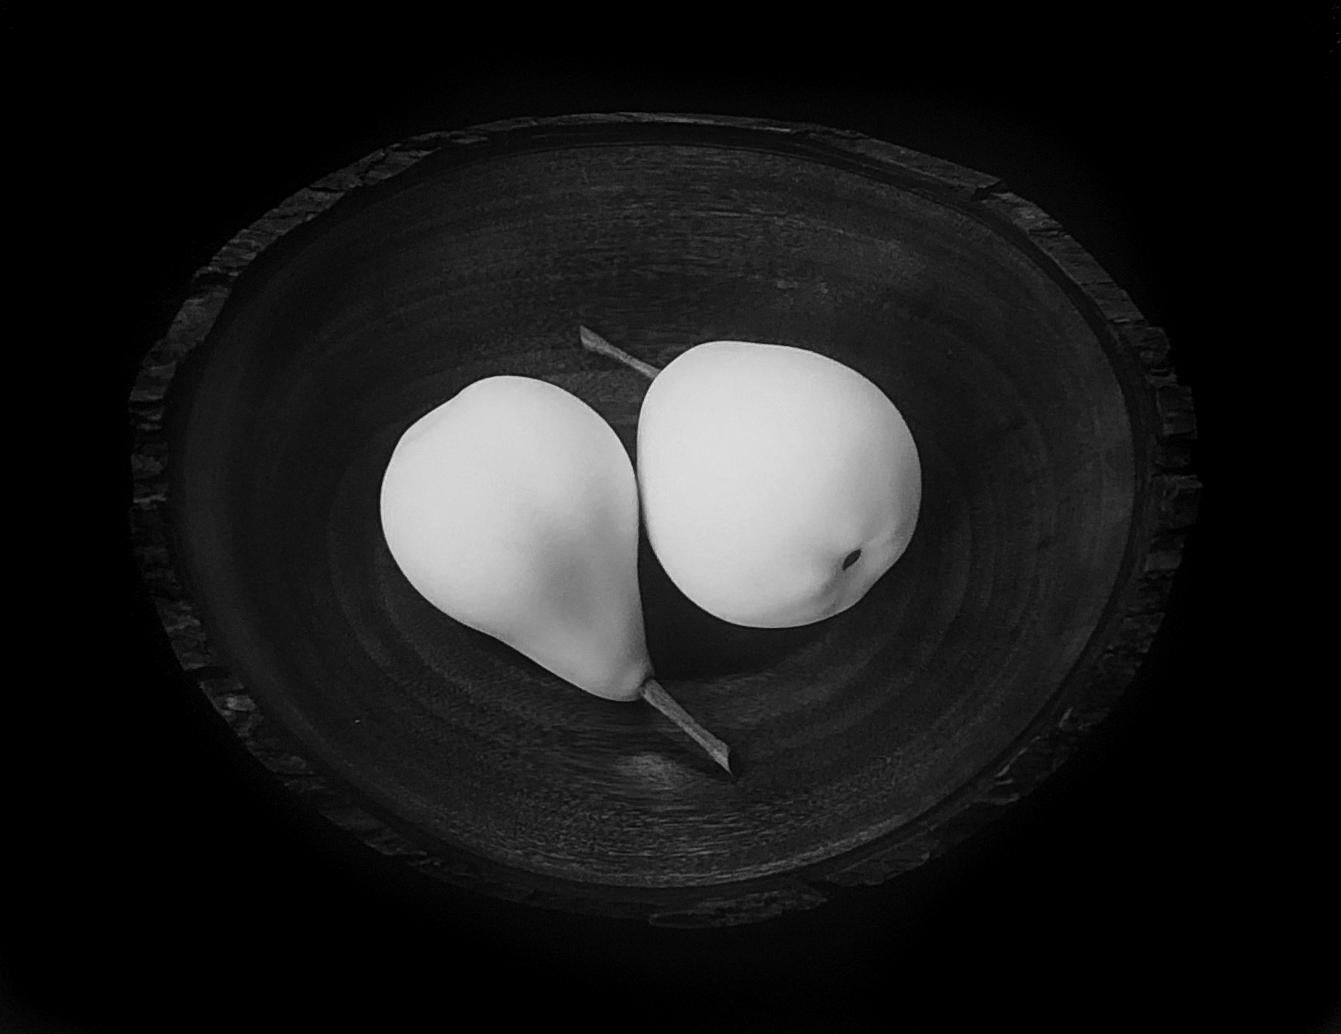 Paul Caponigro, Two Pears, Cushing, ME, 1999, 8.75 x 10.75", silver gelatin print. Signed, titled and dated on mount recto. Excellent condition